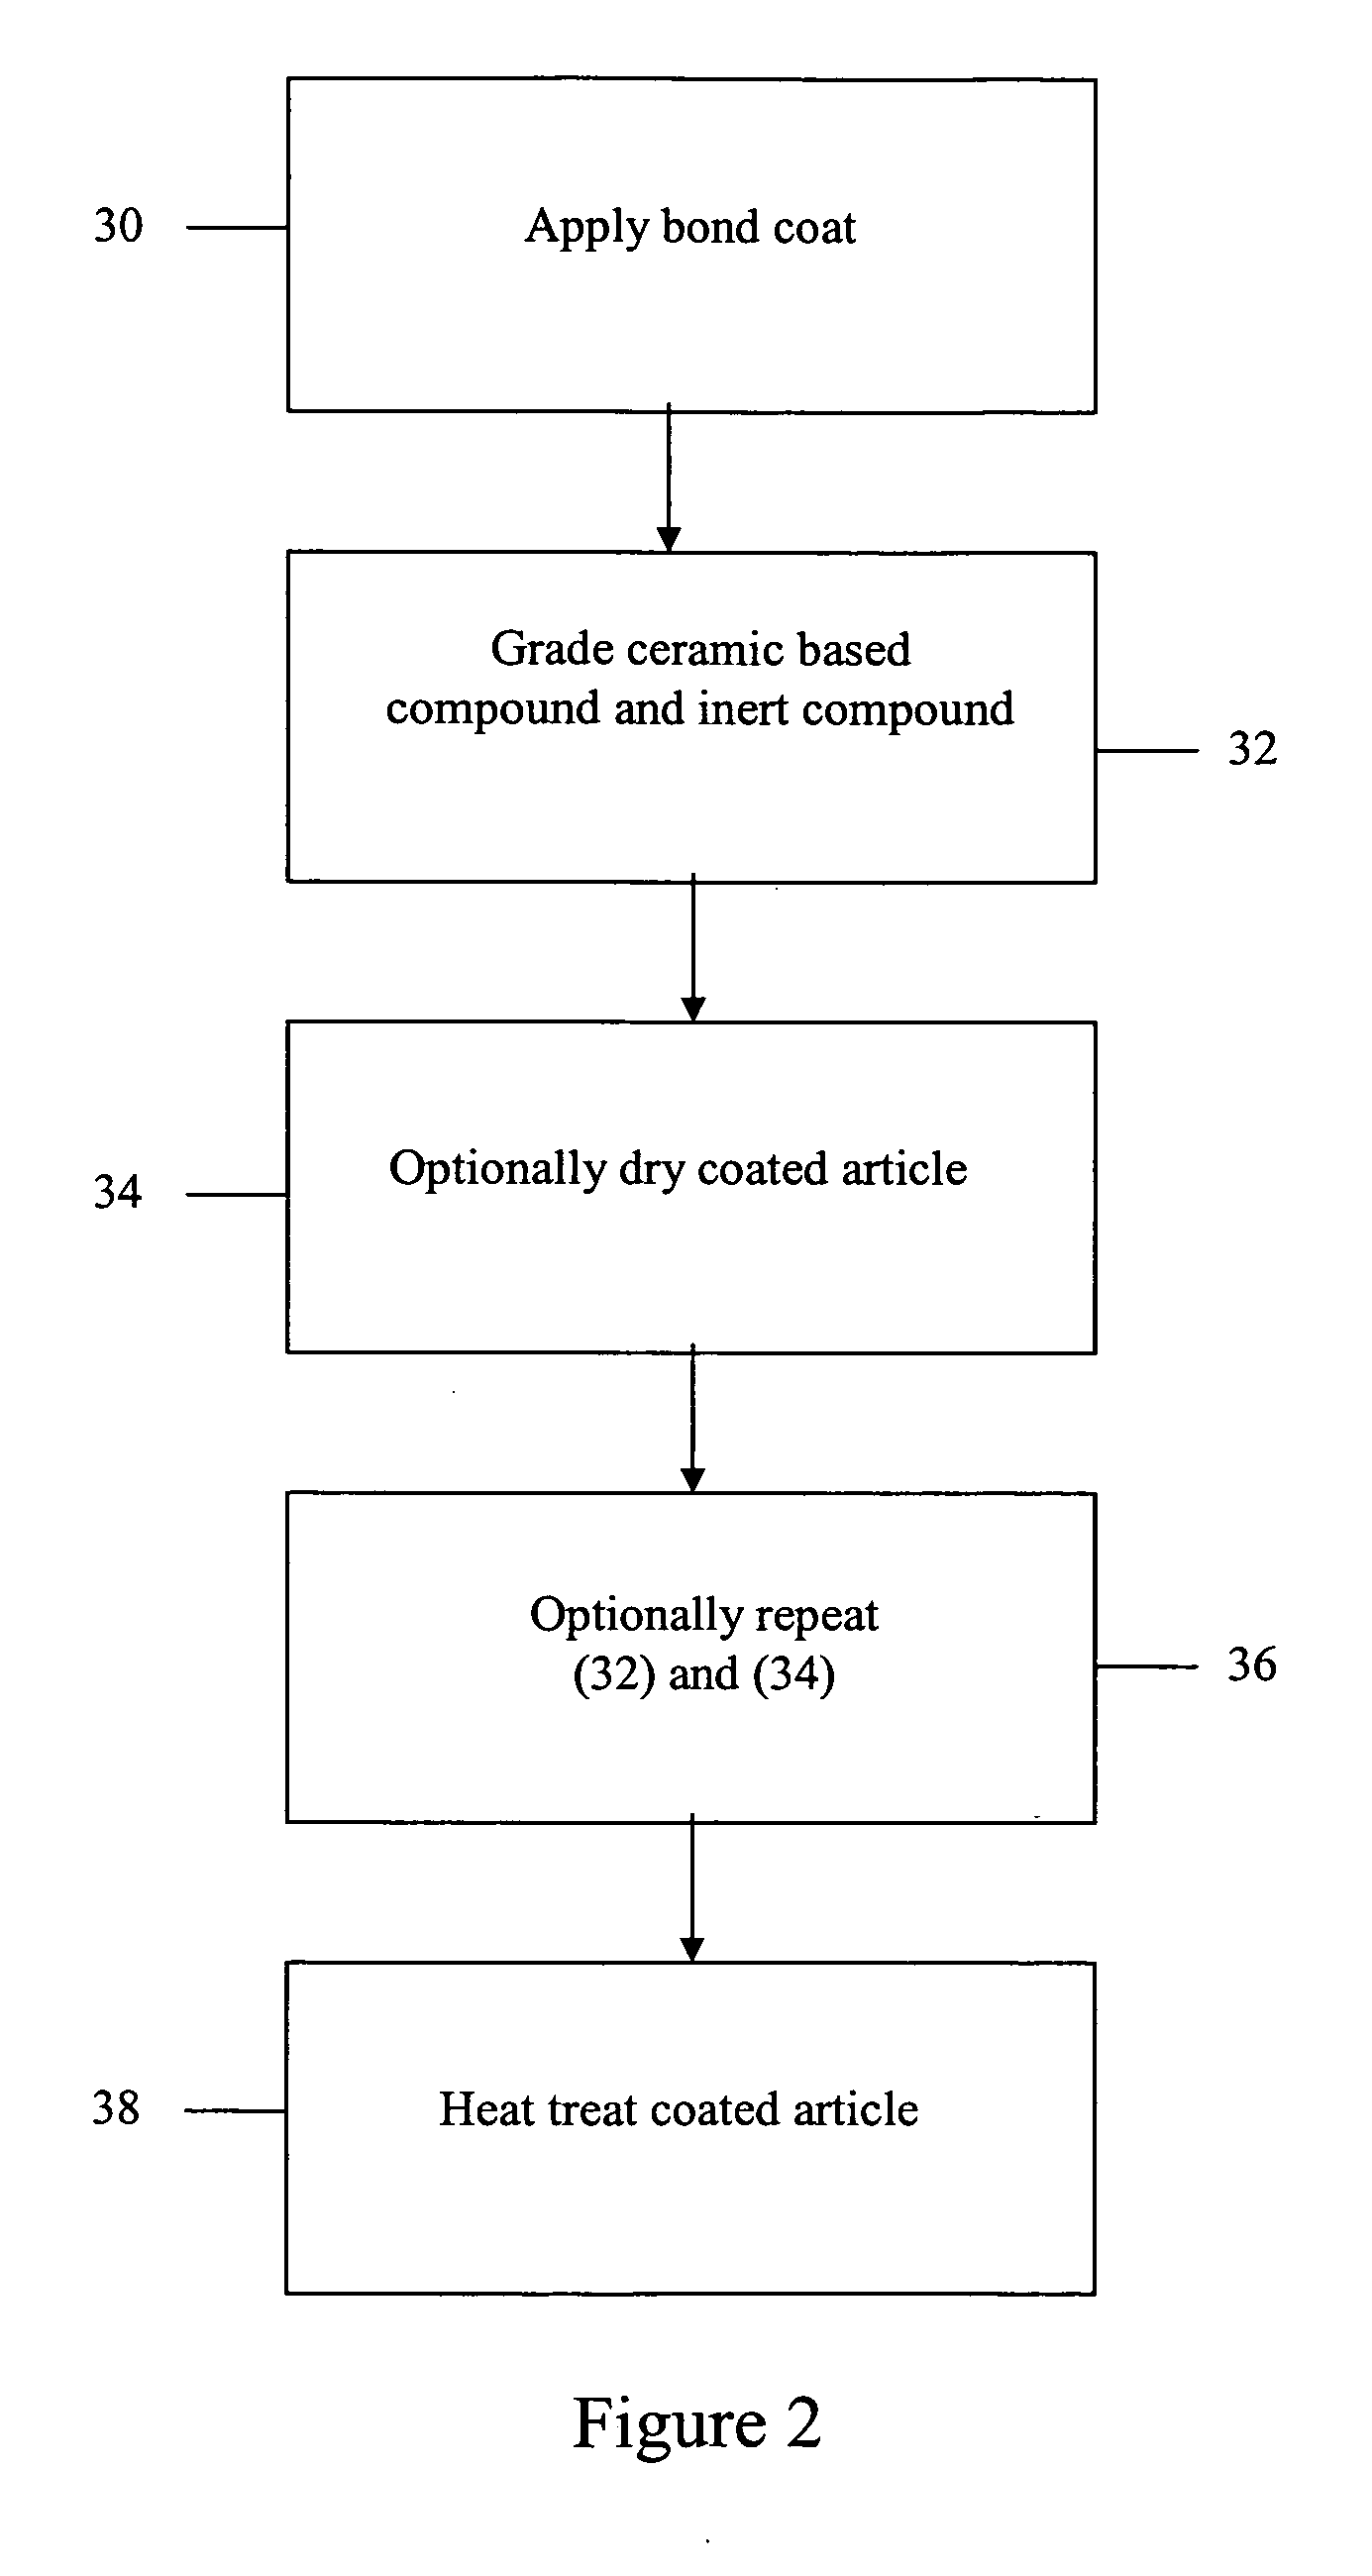 Thermal barrier coating compositions, processes for applying same and articles coated with same